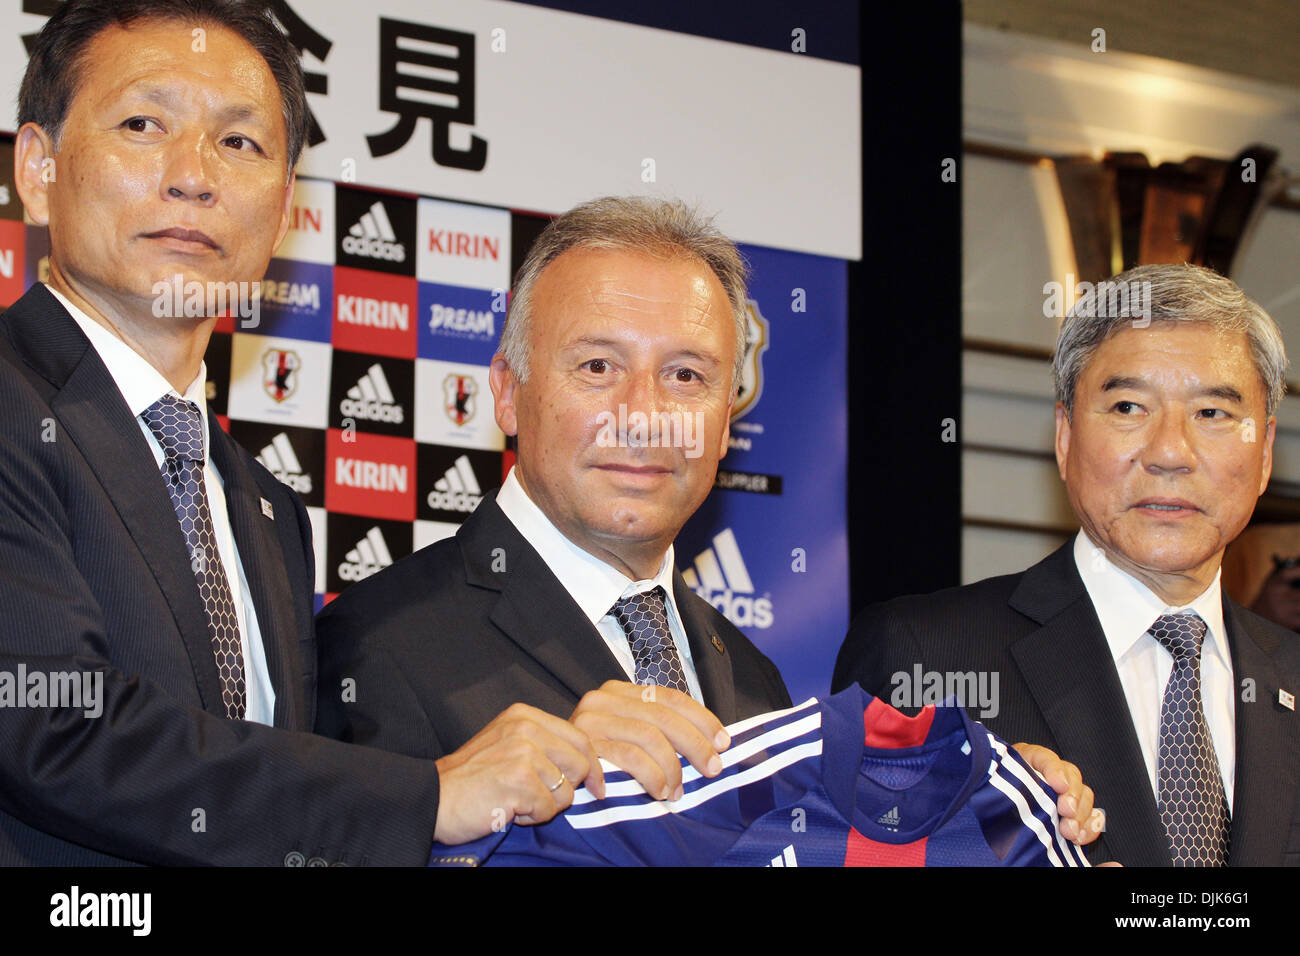 Aug 31, 2010 - Tokyo, Japan - Former AC Milan coach ALBERTO ZACCHERONI (C), JFA technical director HIROMI HARA (L) Vice Chairman of the Japan Football Association (JFA) KUNIYA DAINI (R) attend a press conference announcing of his appointment as Japan's national football coach in Tokyo, Japan. Zaccheroni is to coach the national team to prepare for the next World Cup. ( (Credit Imag Stock Photo